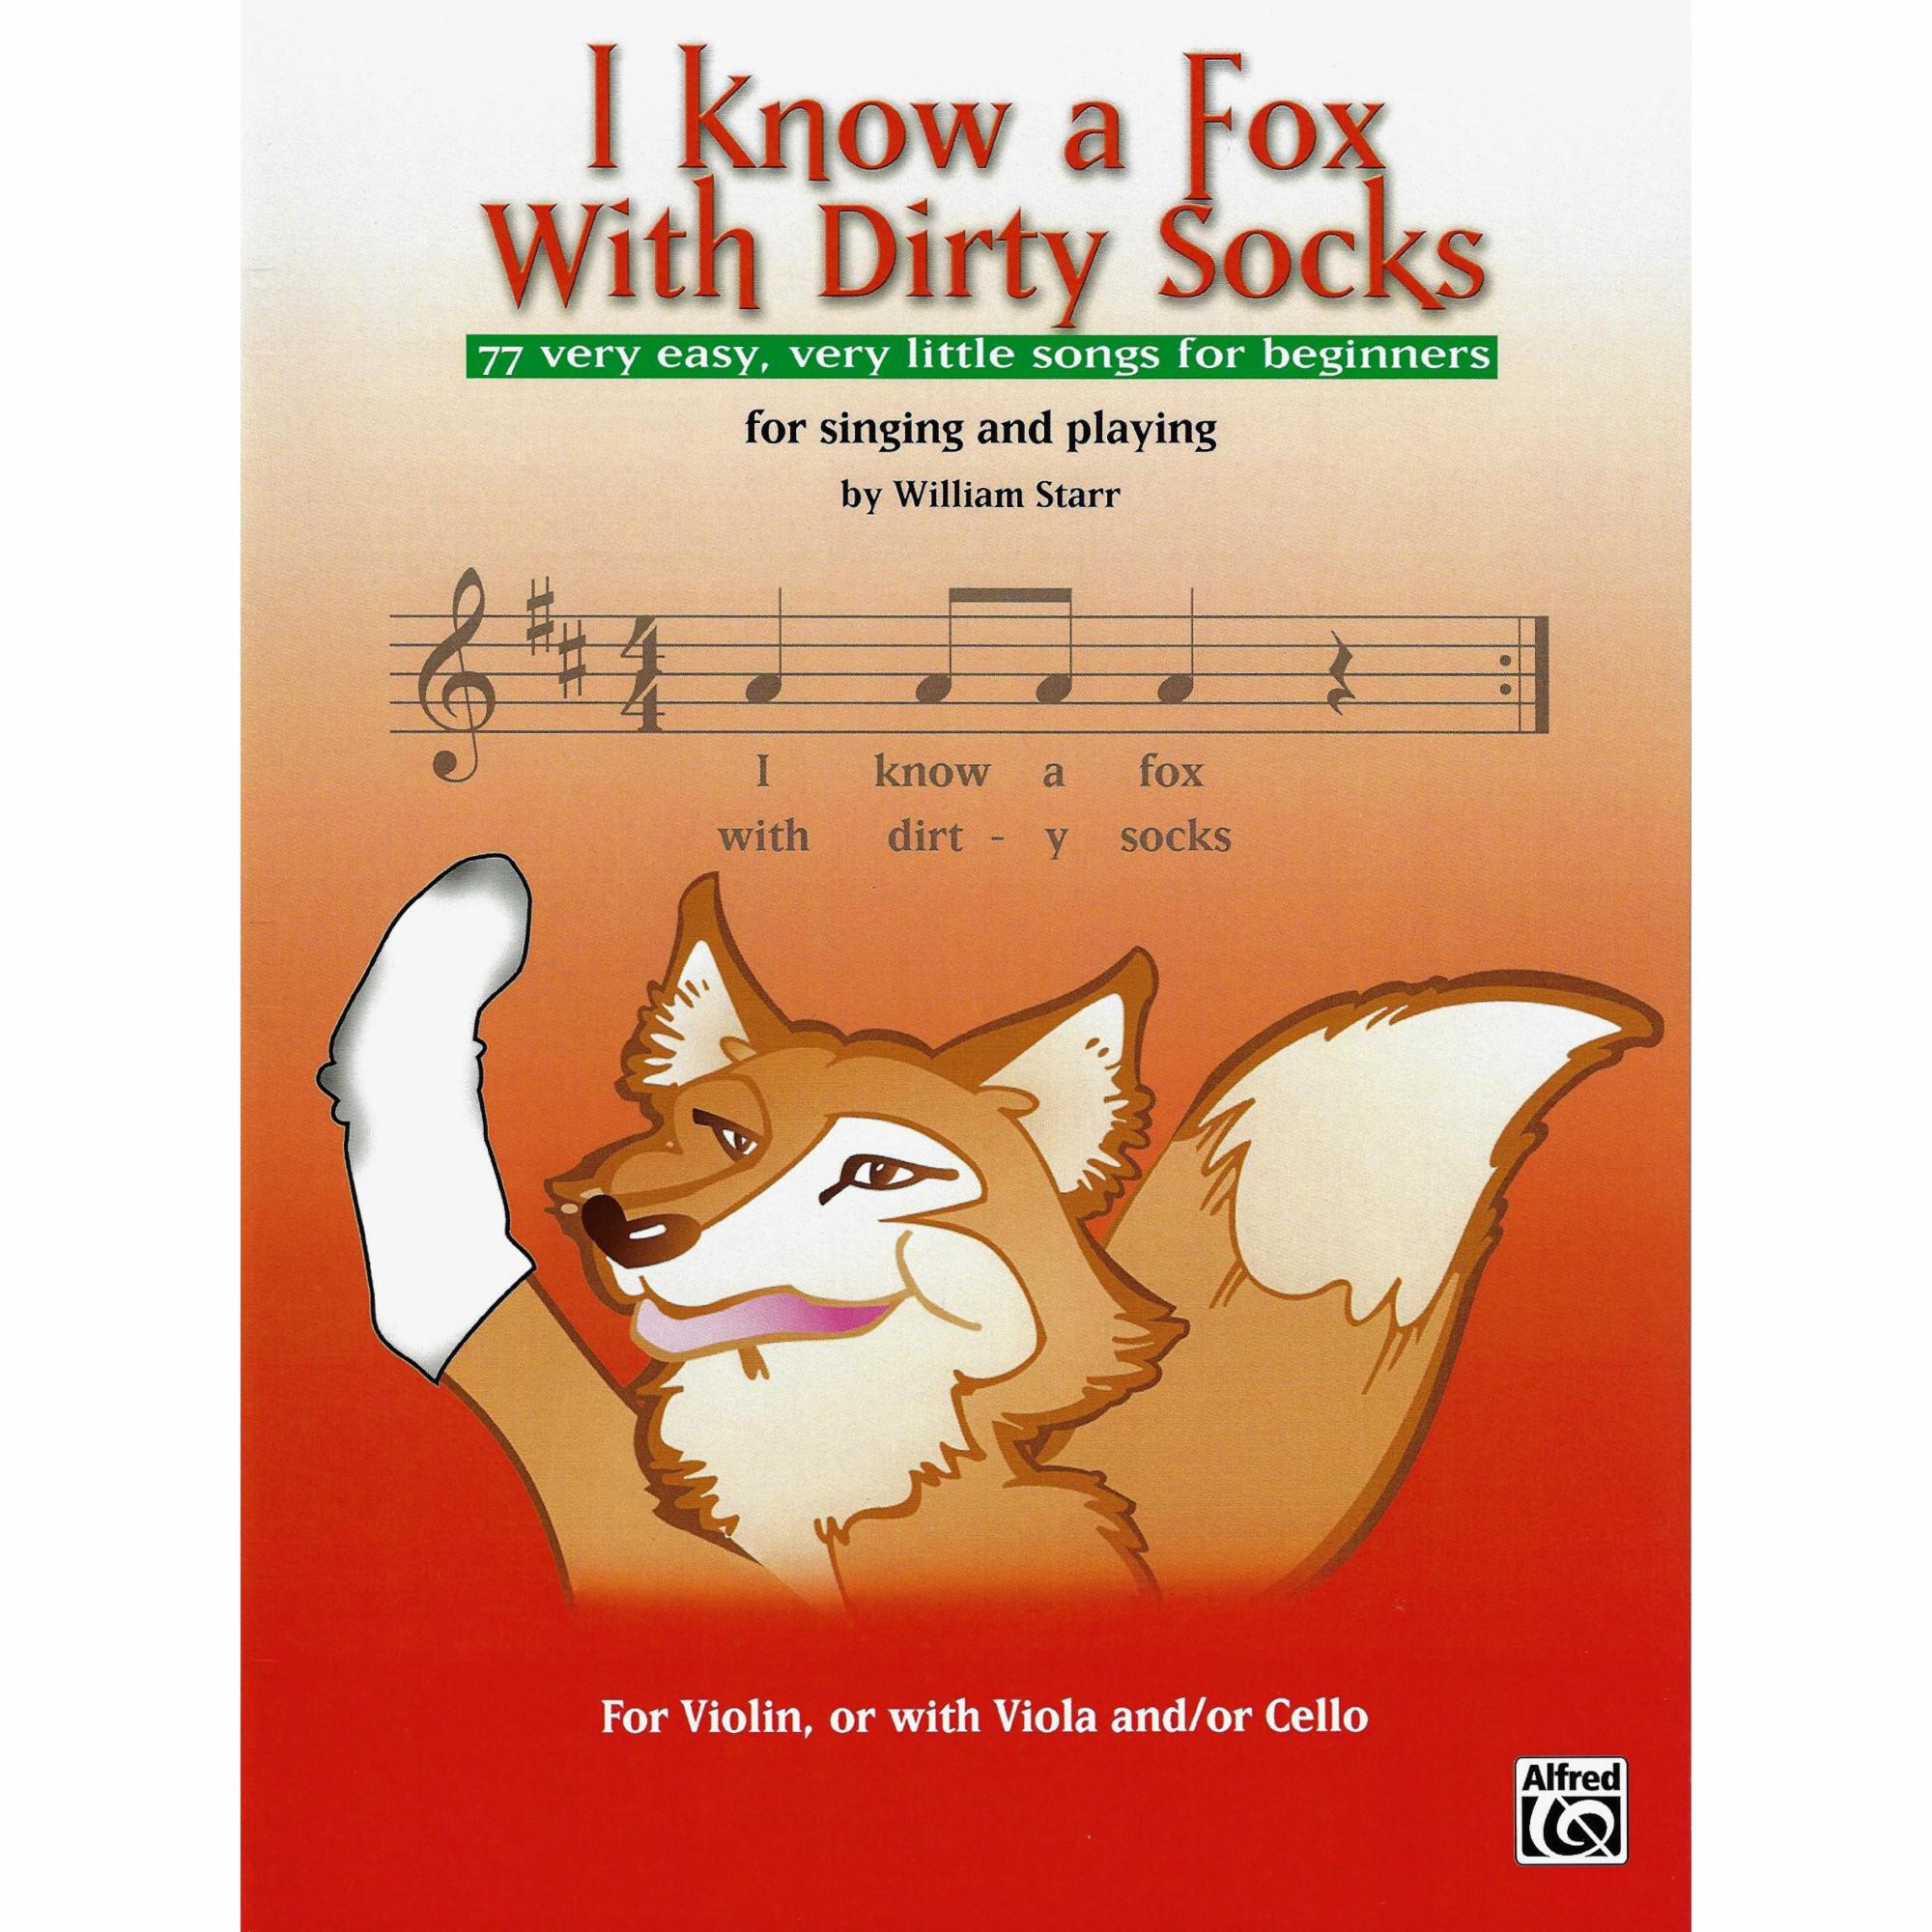 I Know a Fox With Dirty Socks for Violin, Viola, or Cello